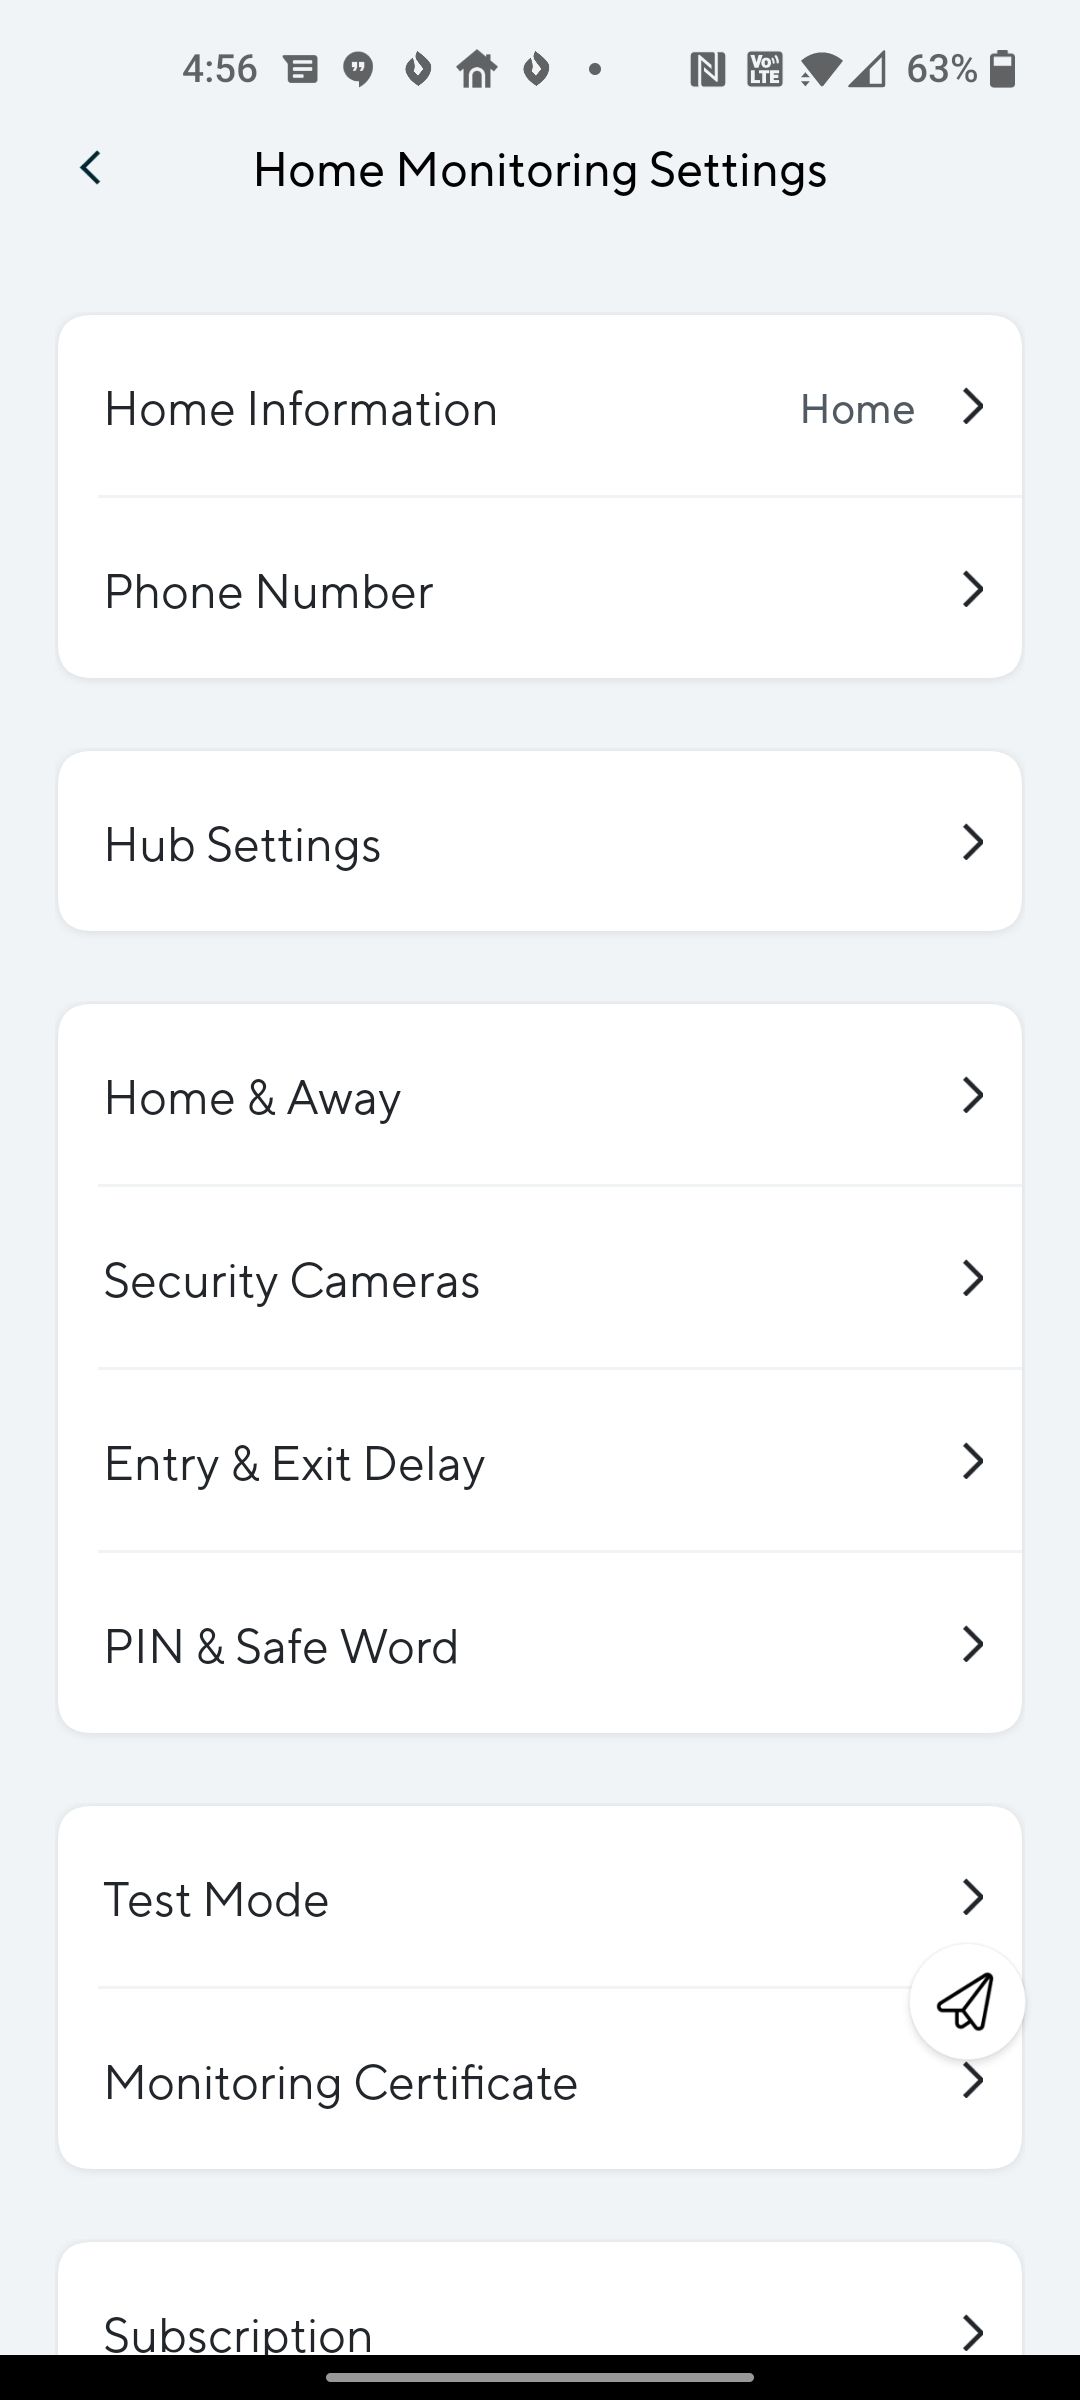 Wyze's Home Monitoring settings.